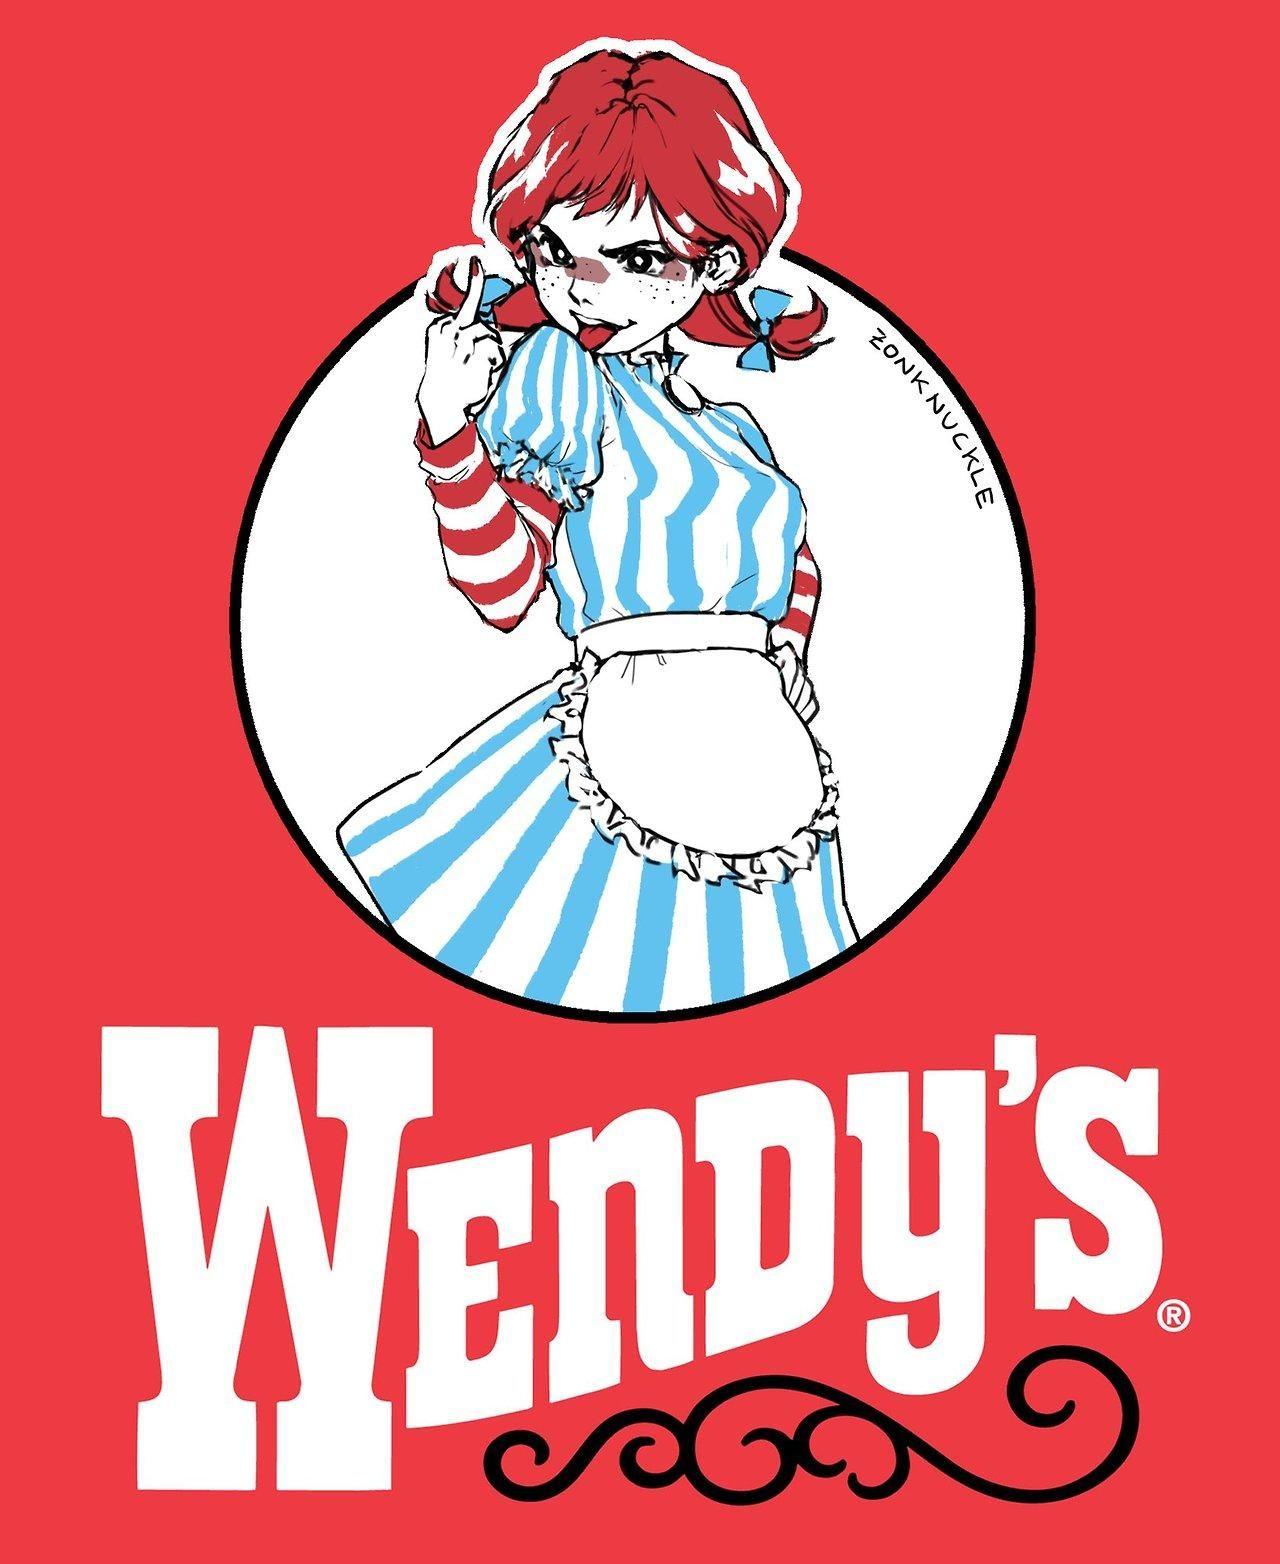 Wendy's Logo - Smug Wendy's logo by Zonk Nuckle. Wendy's meme. Memes, Funny